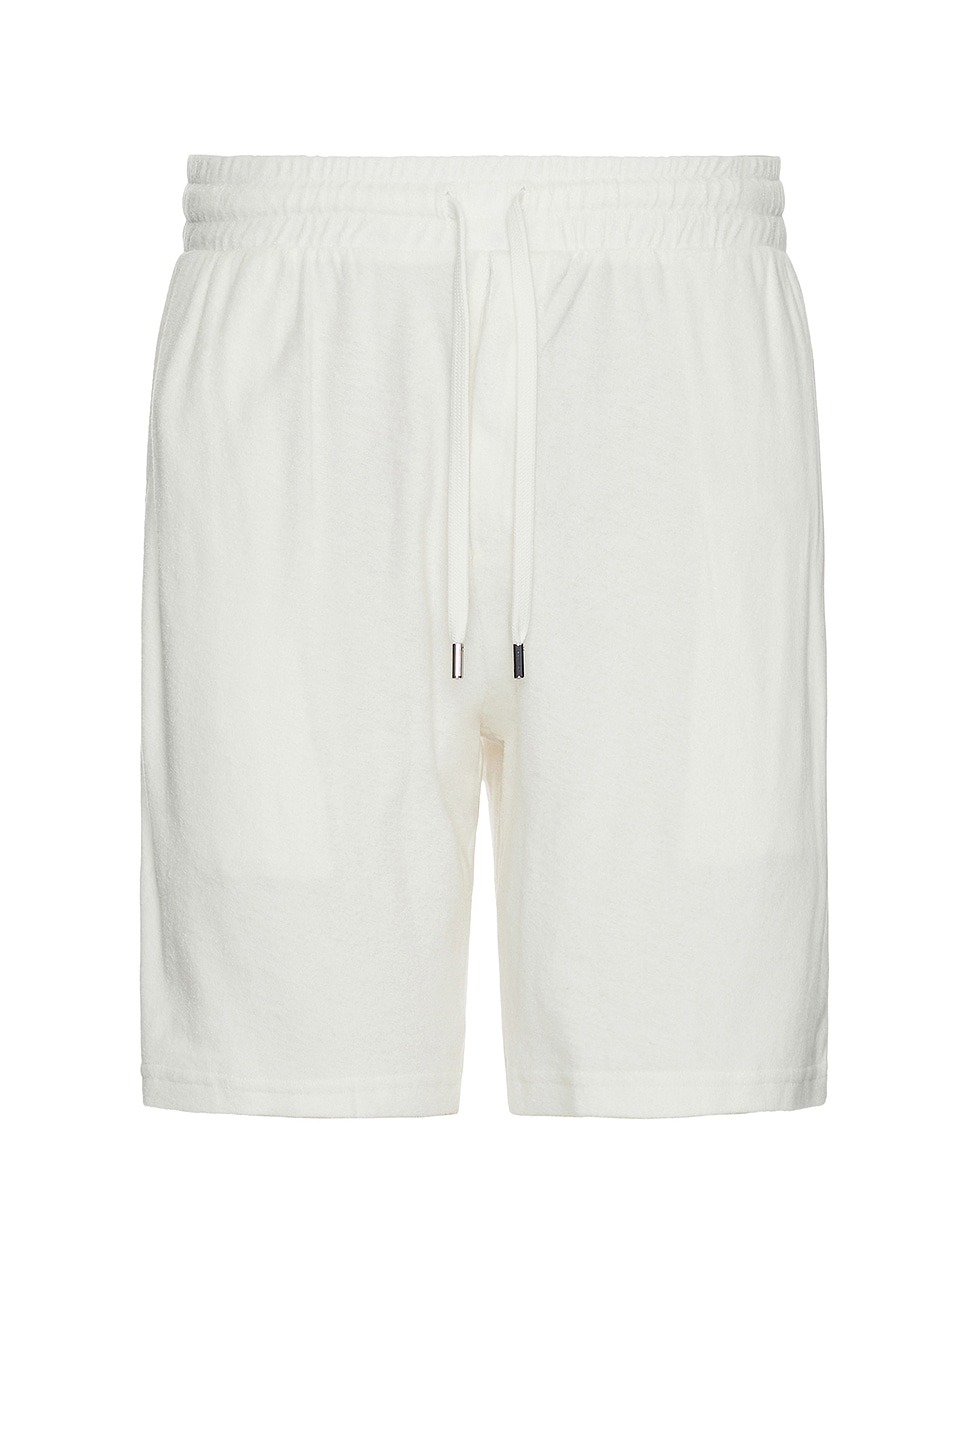 Image 1 of Frescobol Carioca Augusto Terry Cotton Blend Shorts in Ivory